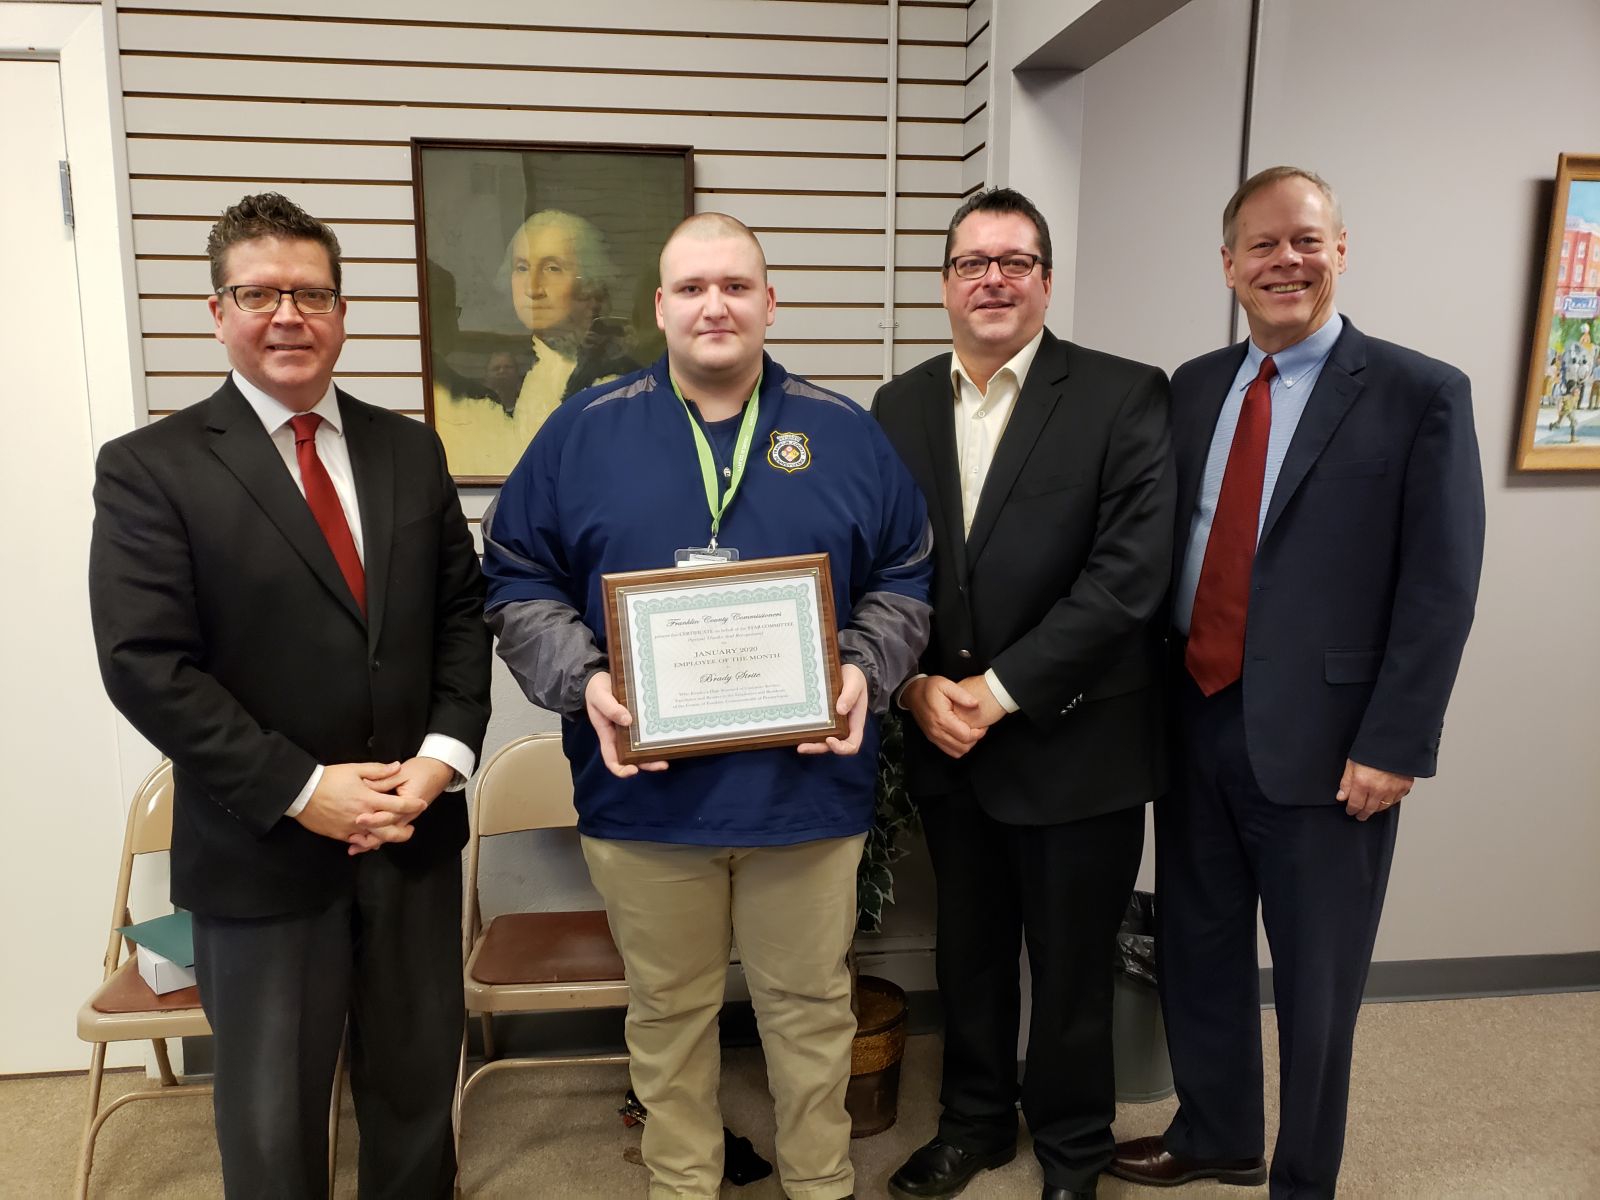 Pictured (left to right): Commissioner Chairman Dave Keller, Telecommunicator Brady Strite, Commissioner John Flannery, Commissioner Bob Ziobrowski